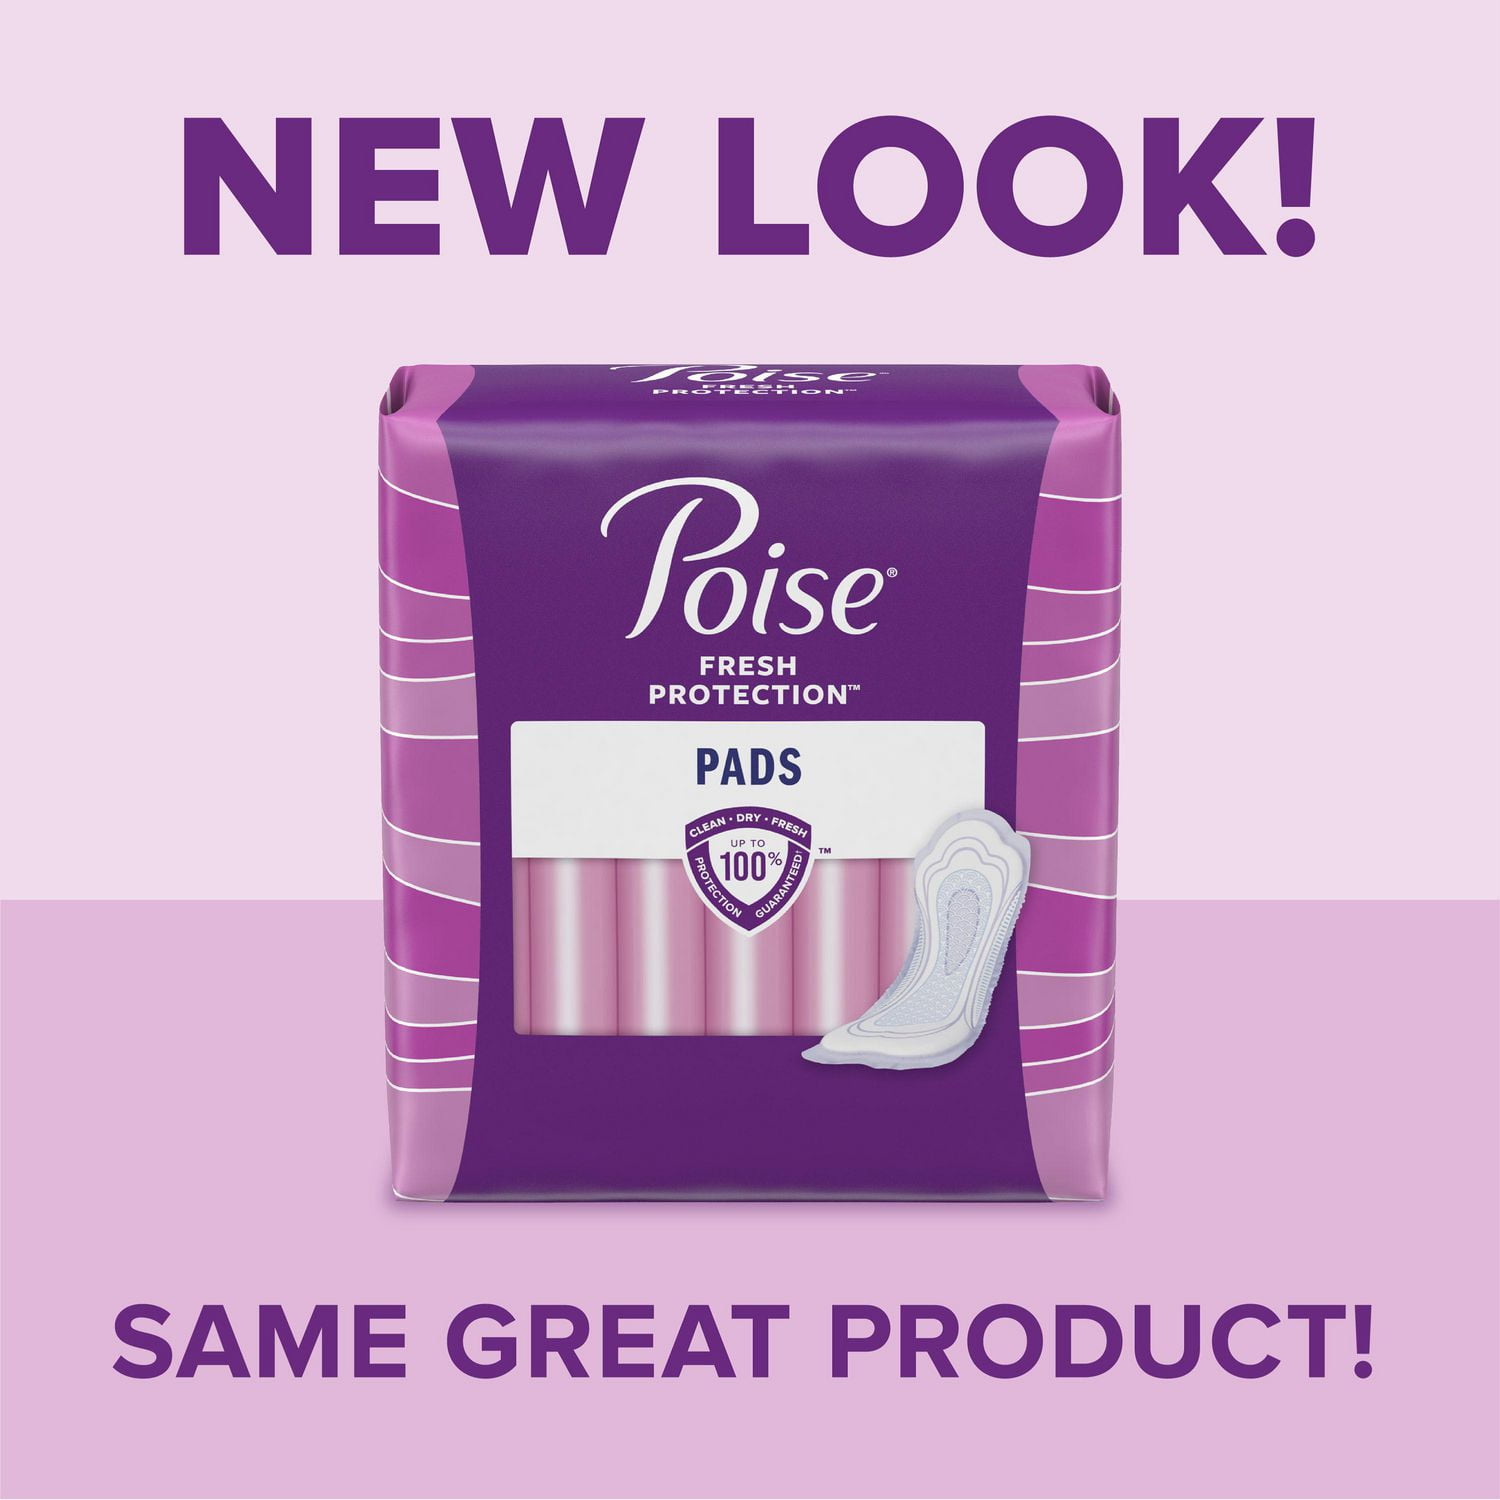 Poise Overnight Incontinence Pads for Women Ultimate Absorbency